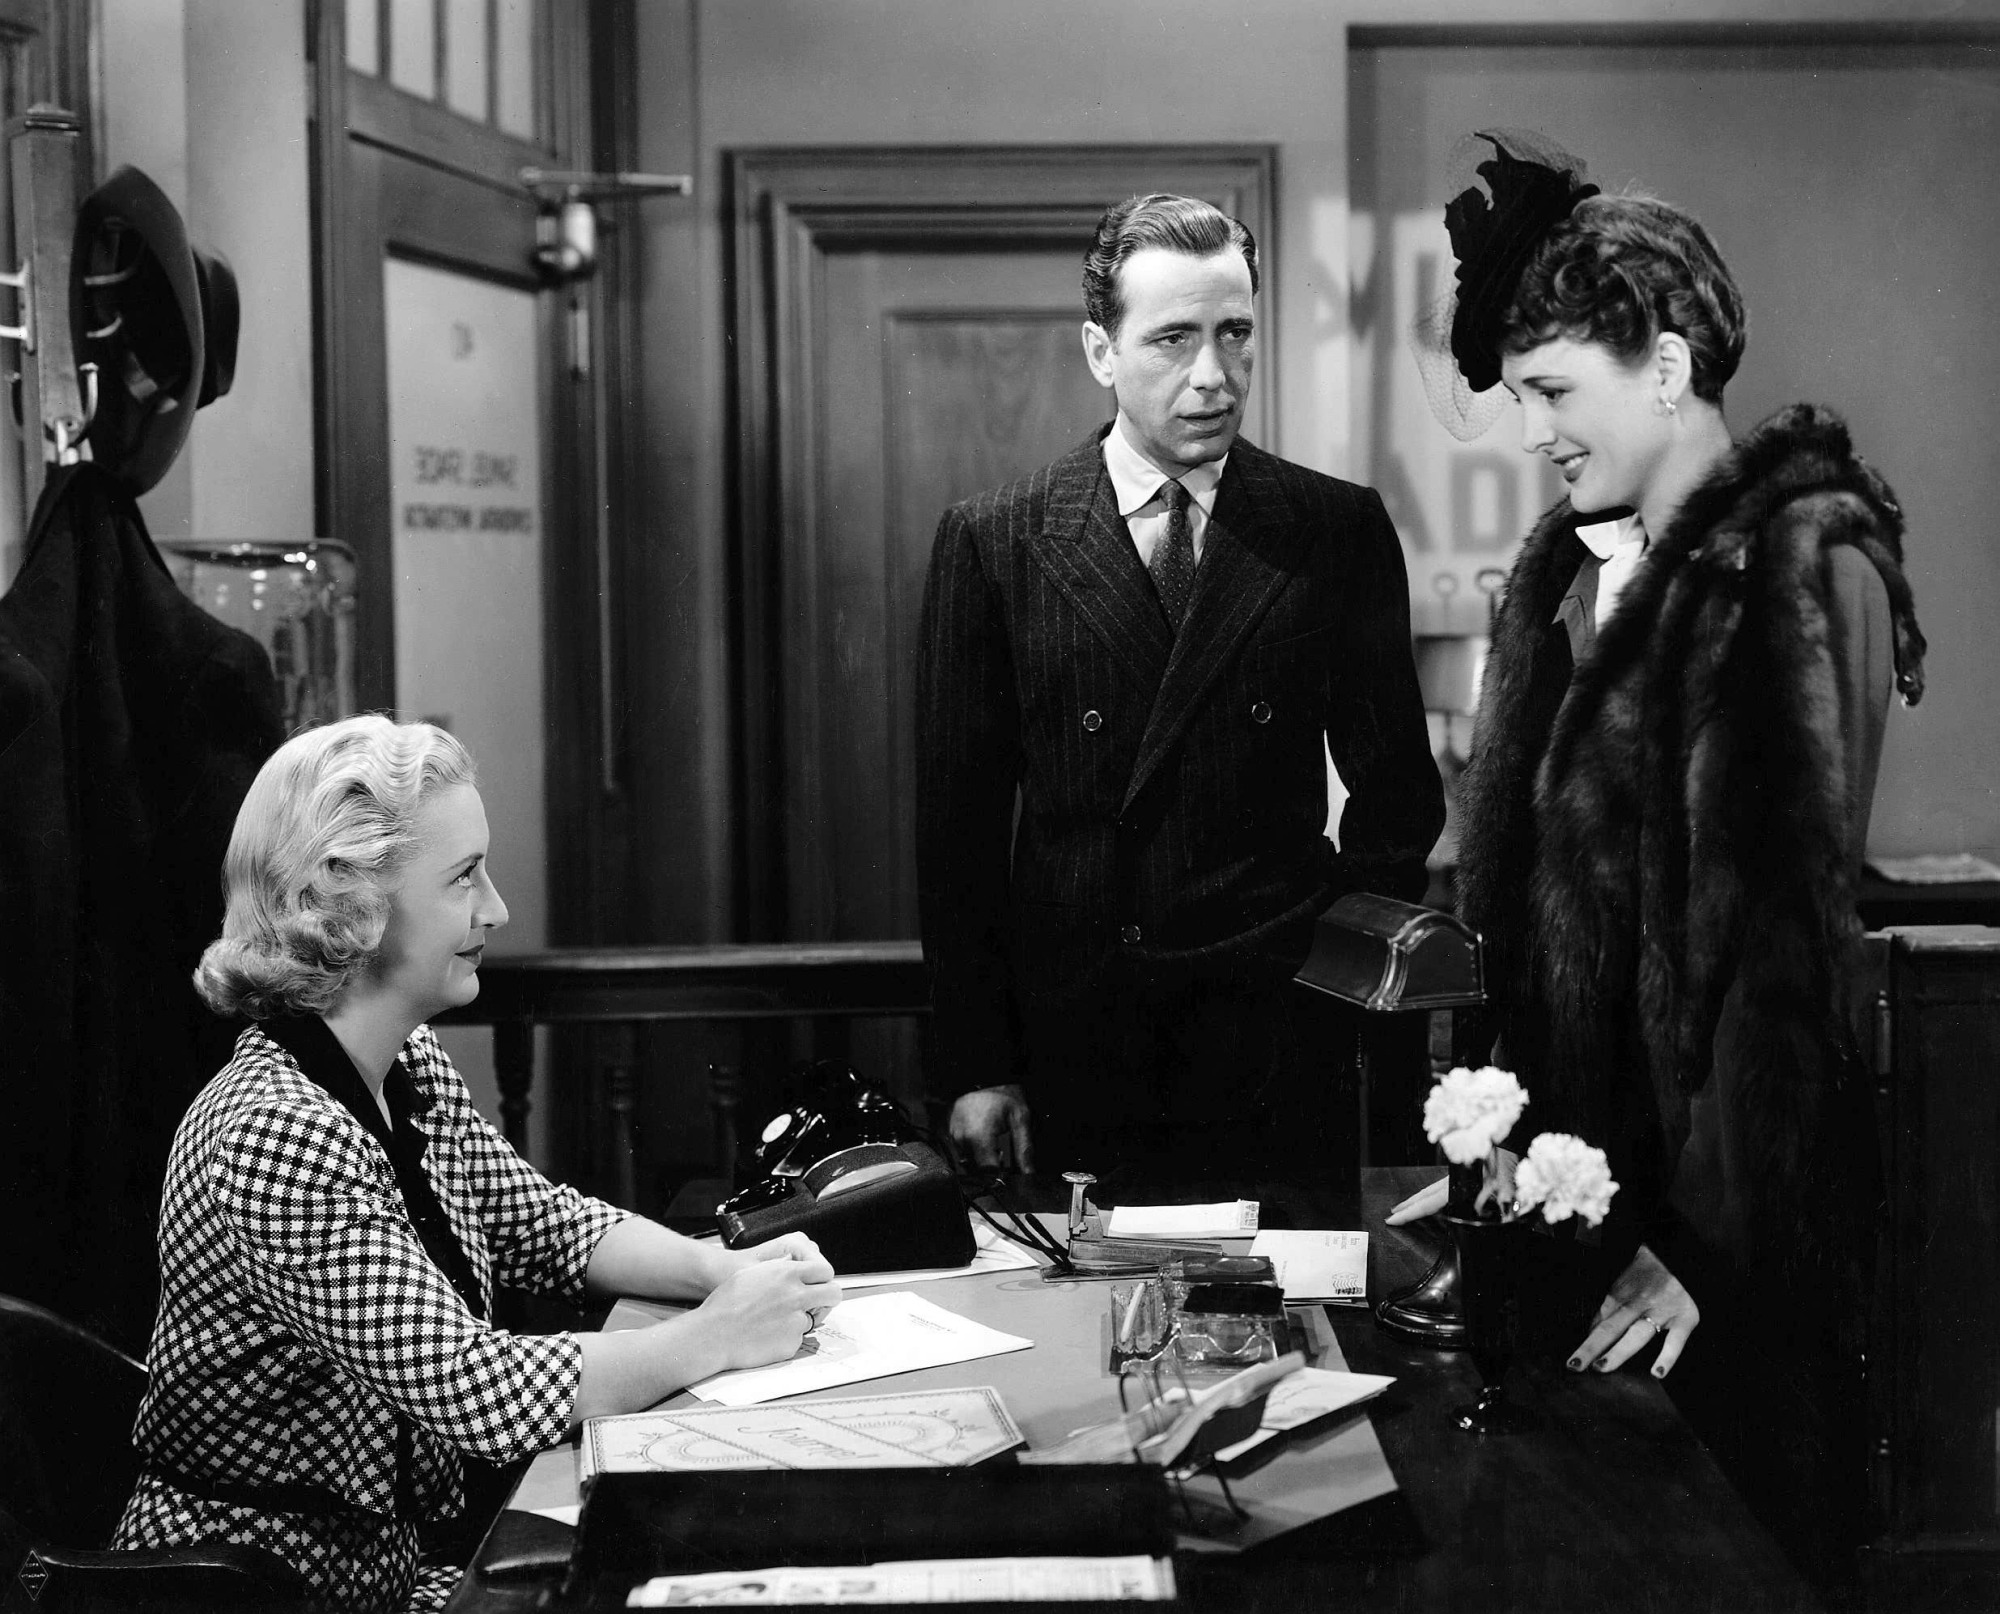 Humphrey Bogart, Mary Astor, and Lee Patrick get their noir on in 'The Maltese Falcon.'